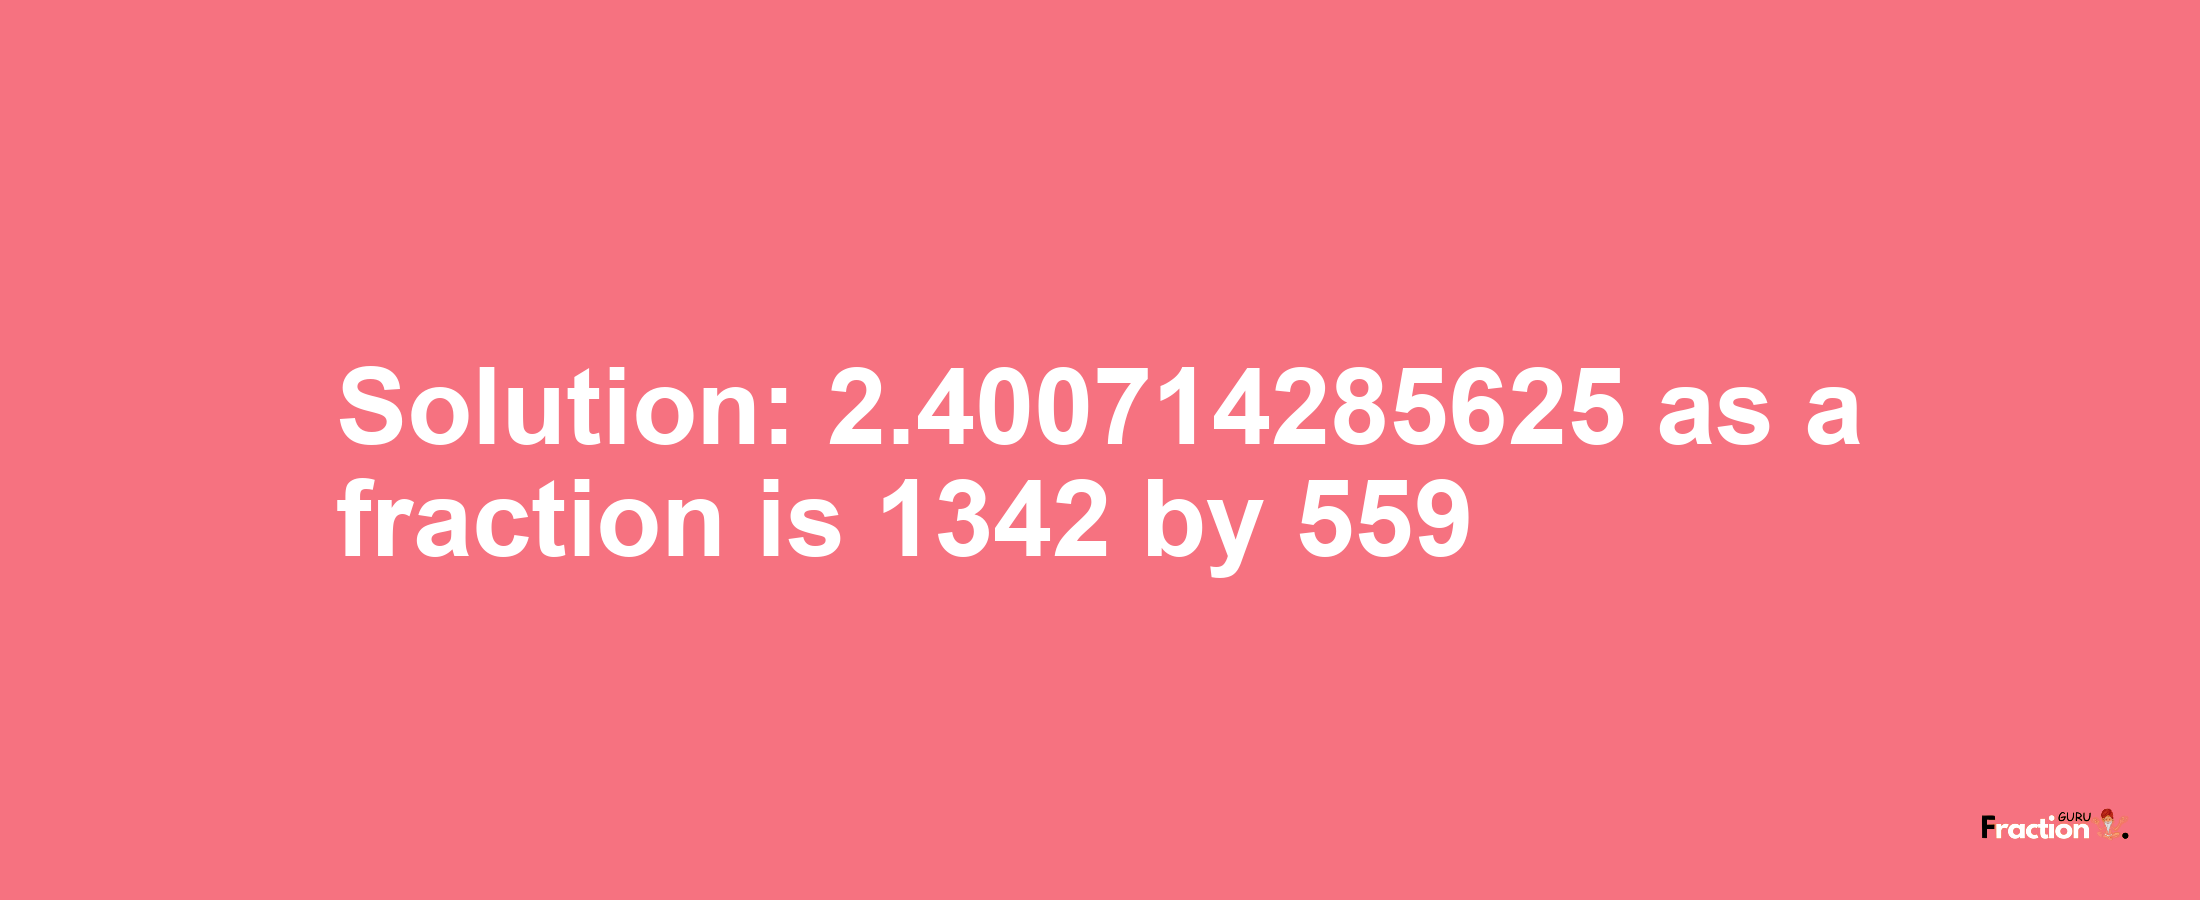 Solution:2.400714285625 as a fraction is 1342/559